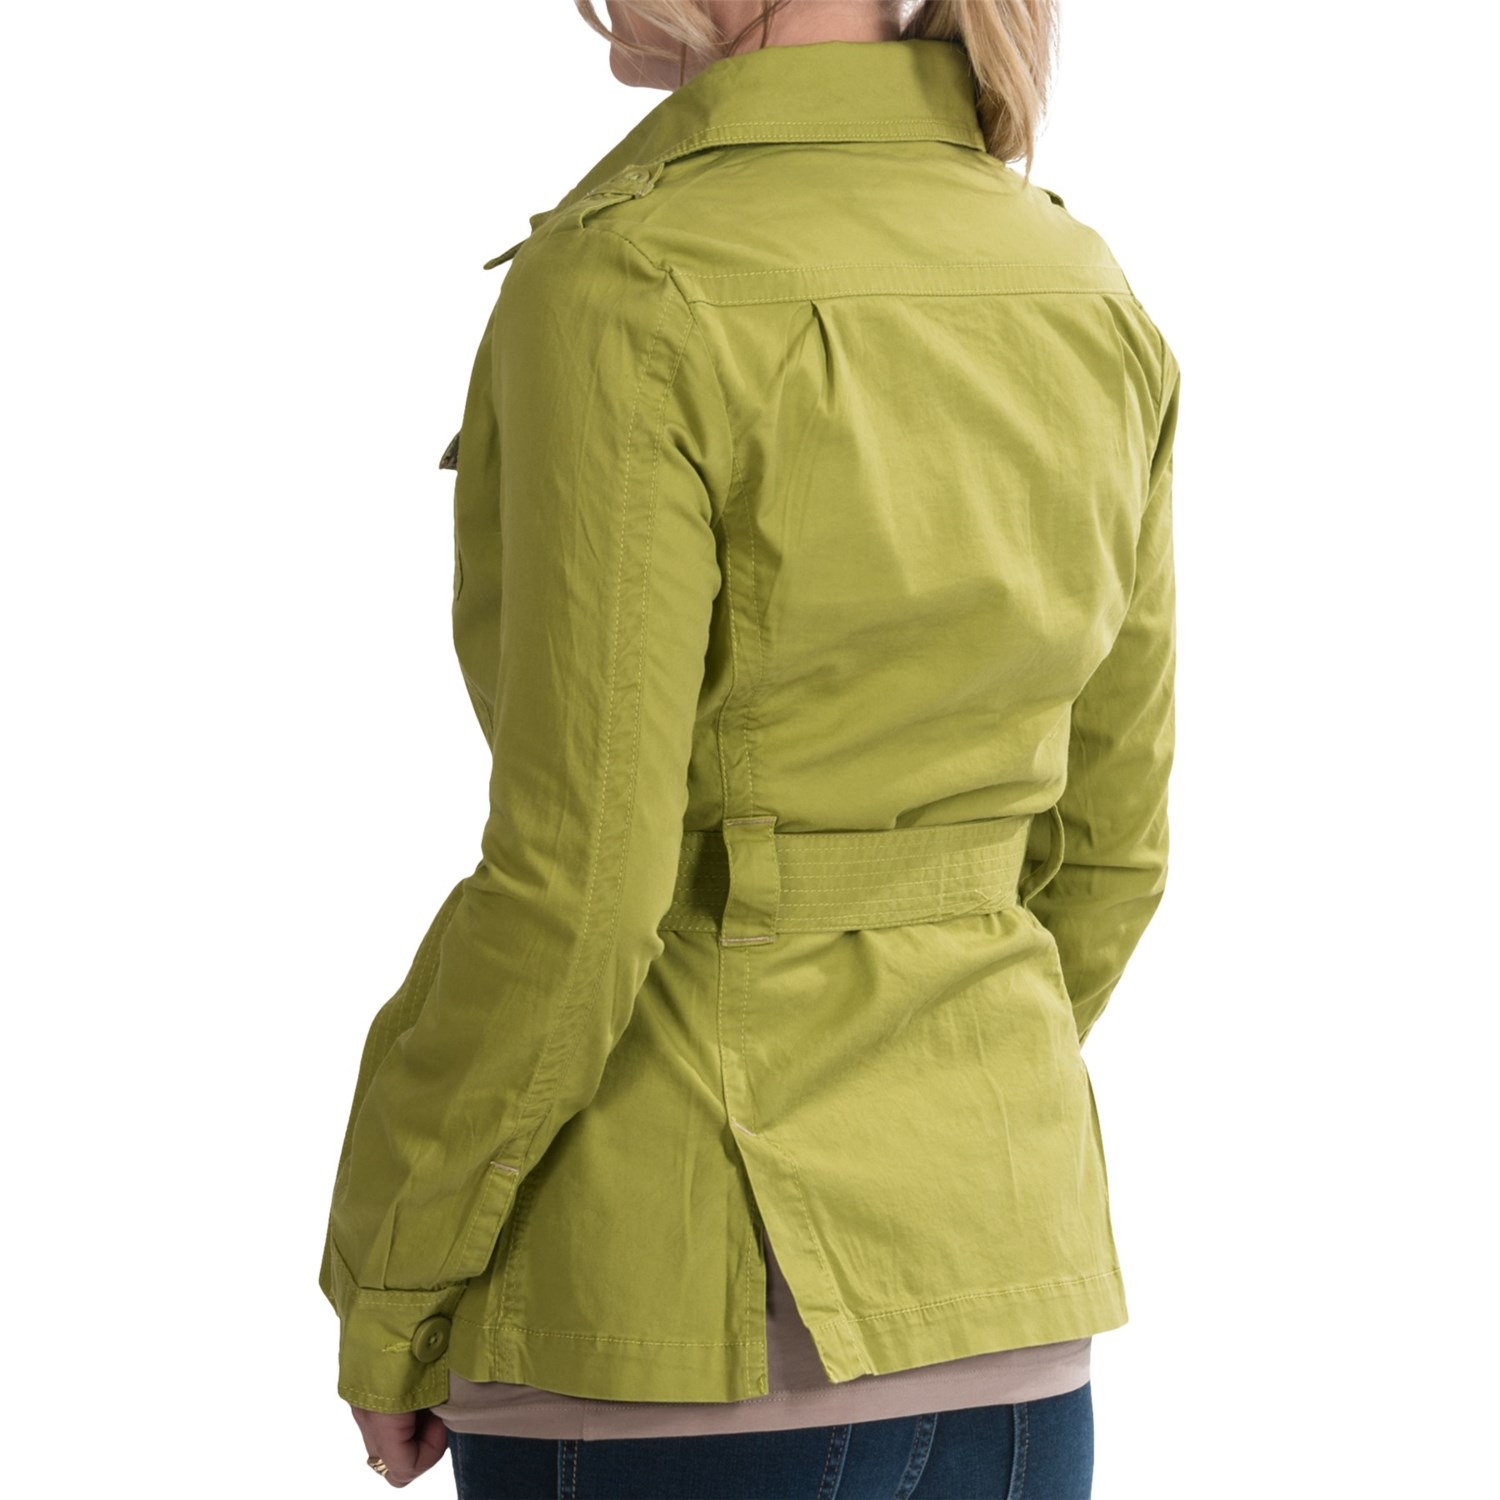 Aventura Clothing Arden Jacket (For Women) - Save 41%